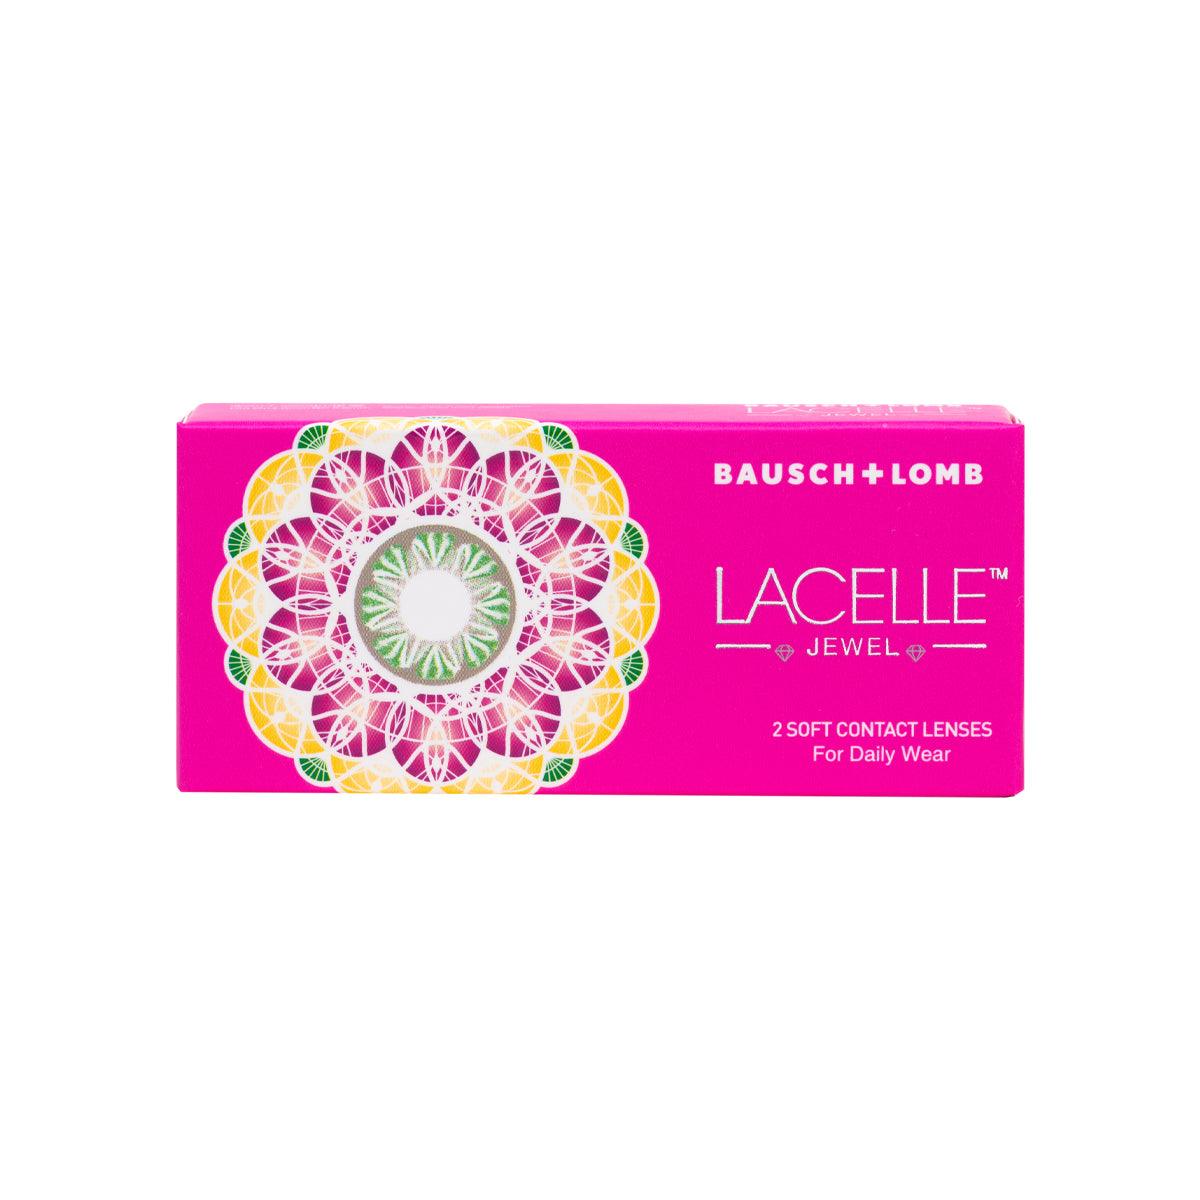 Bausch + Lomb Lacelle Jewel Brown - TA-TO.com